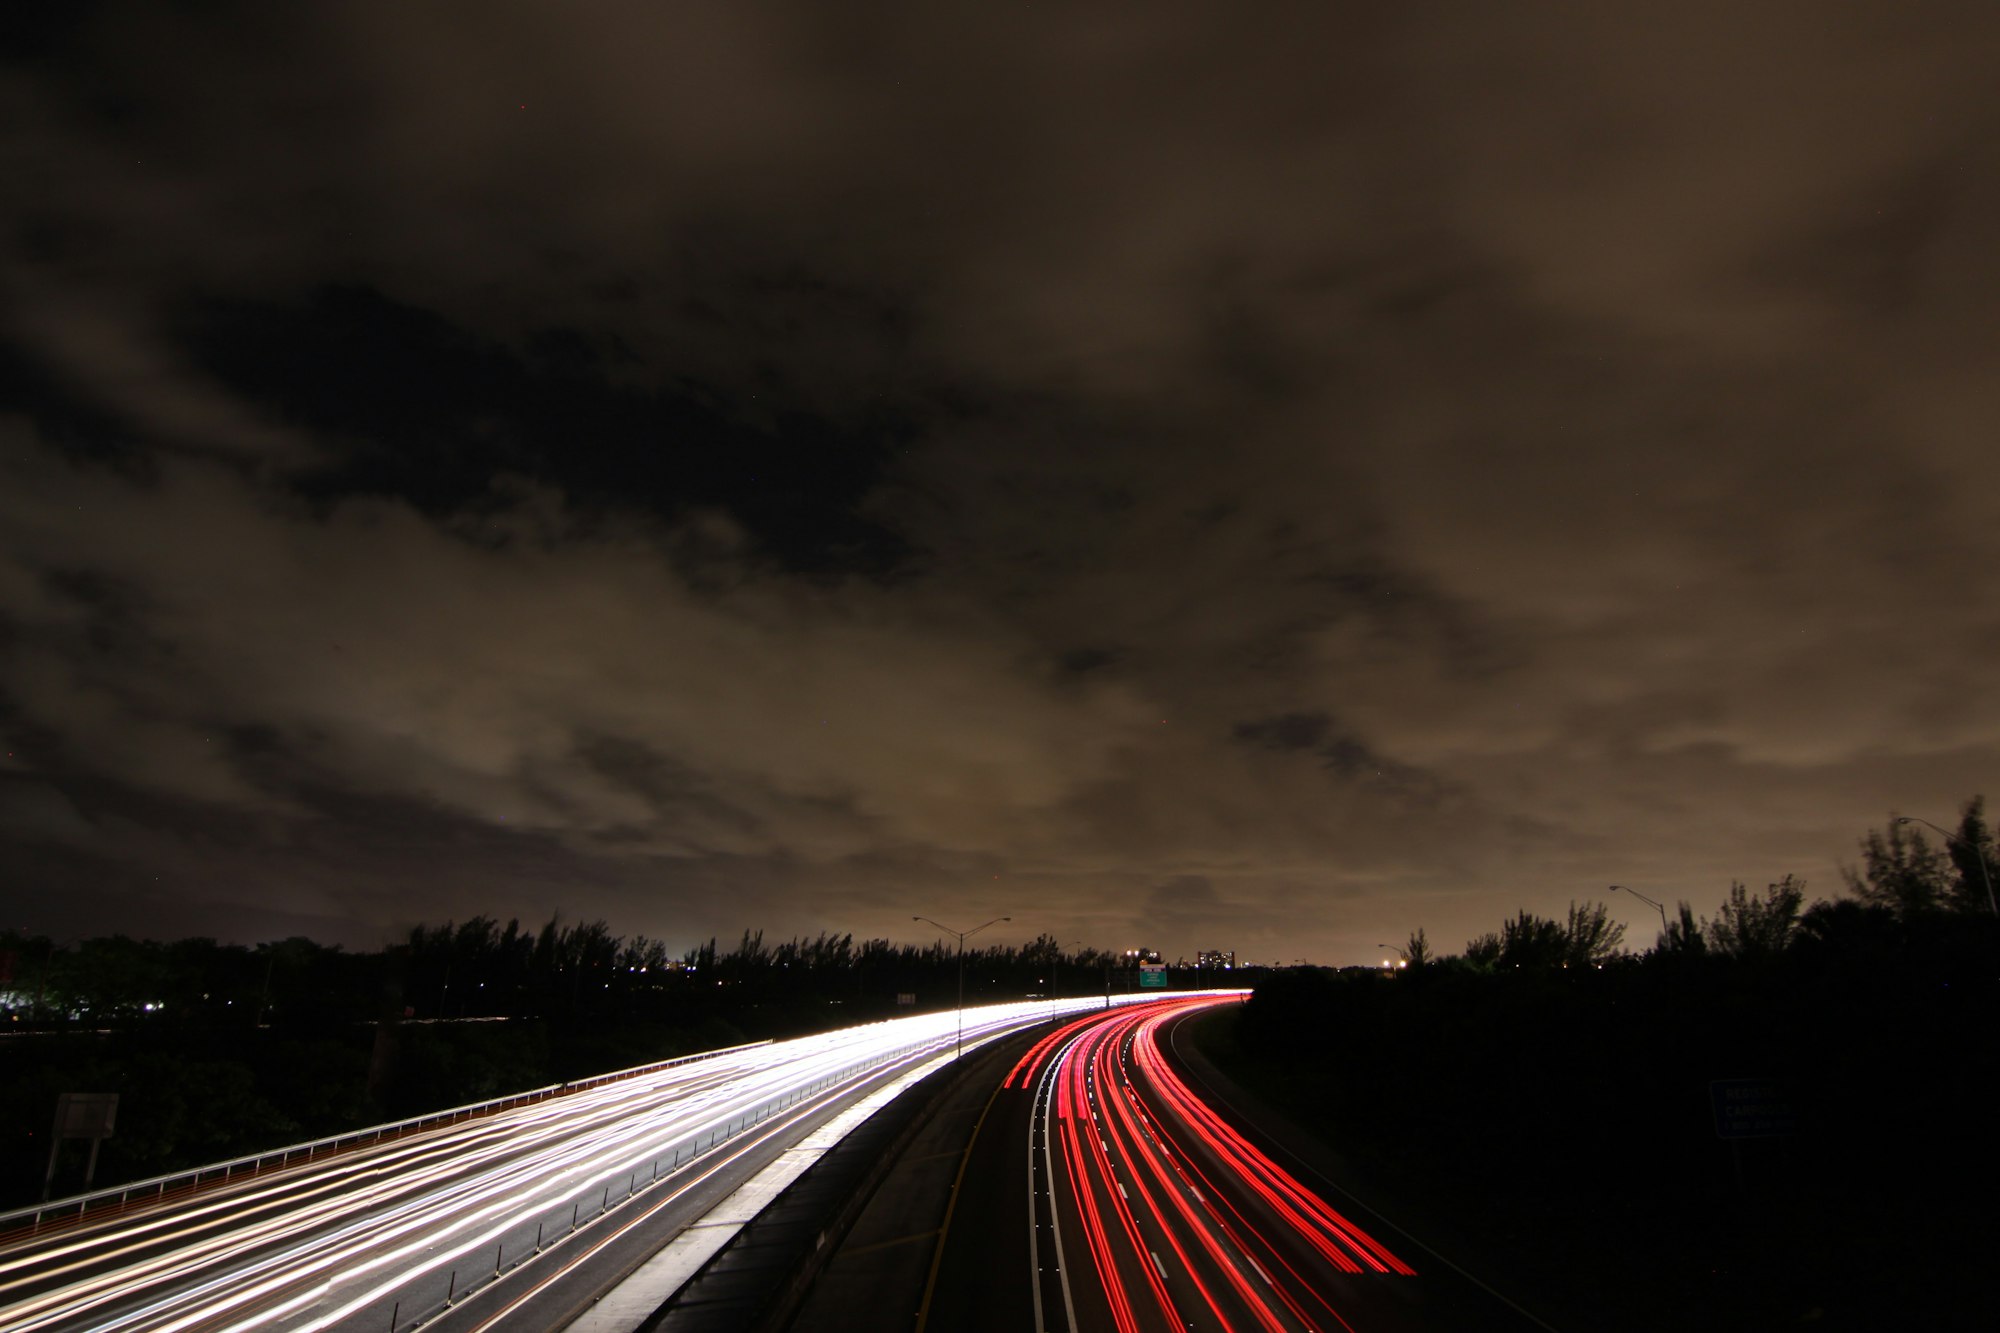 Timelapse photography of passing cars on road at nighttime